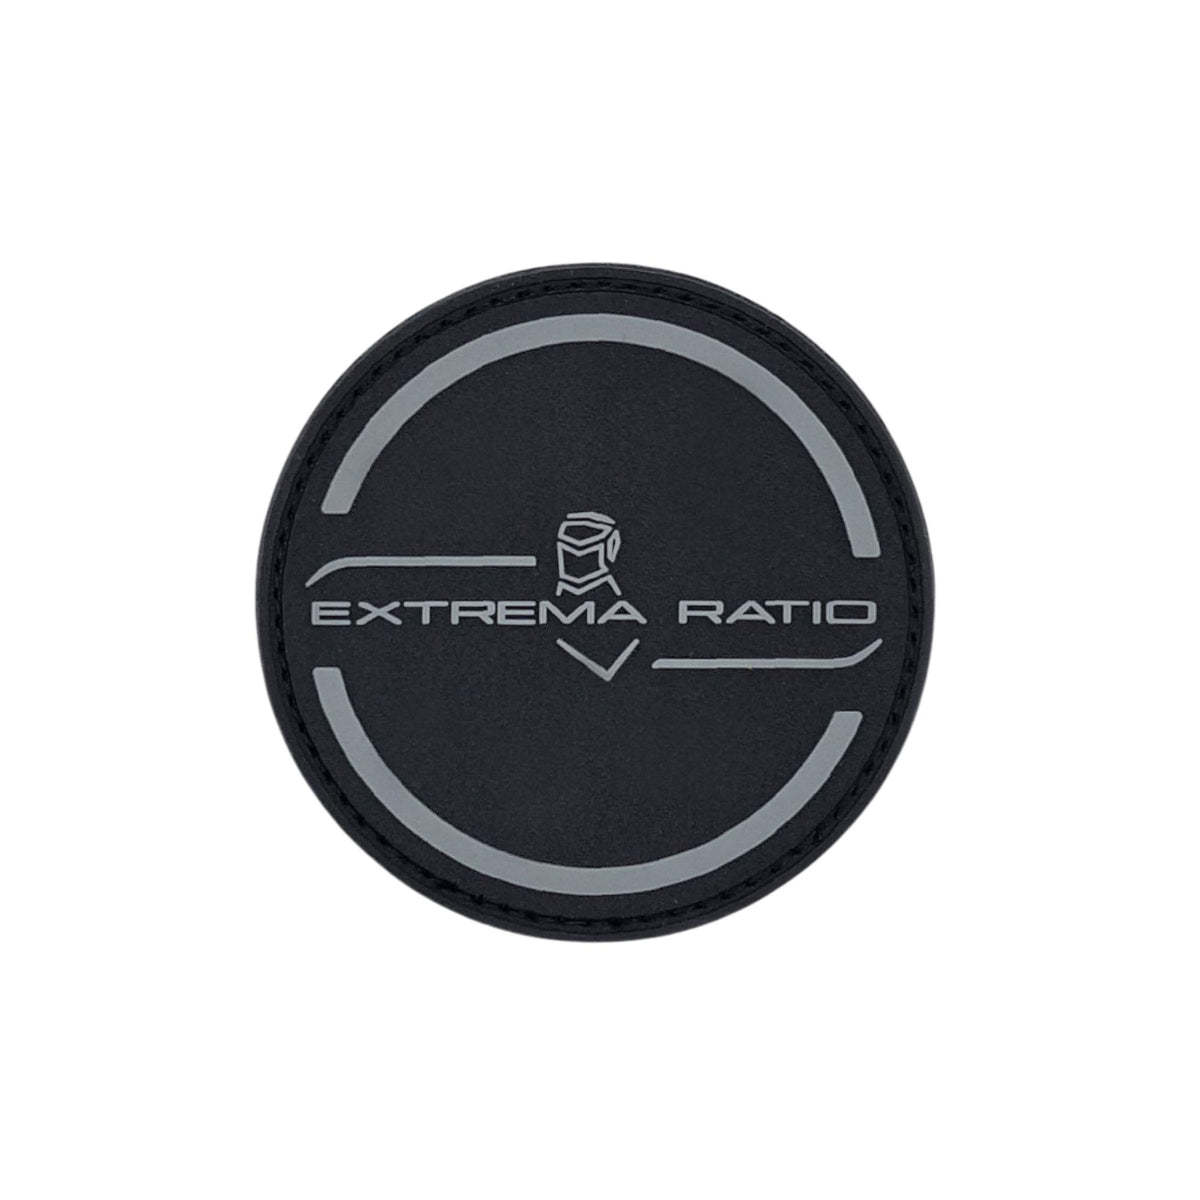 EXTREMA RATIO | LOGO PATCH - Patch in TPR